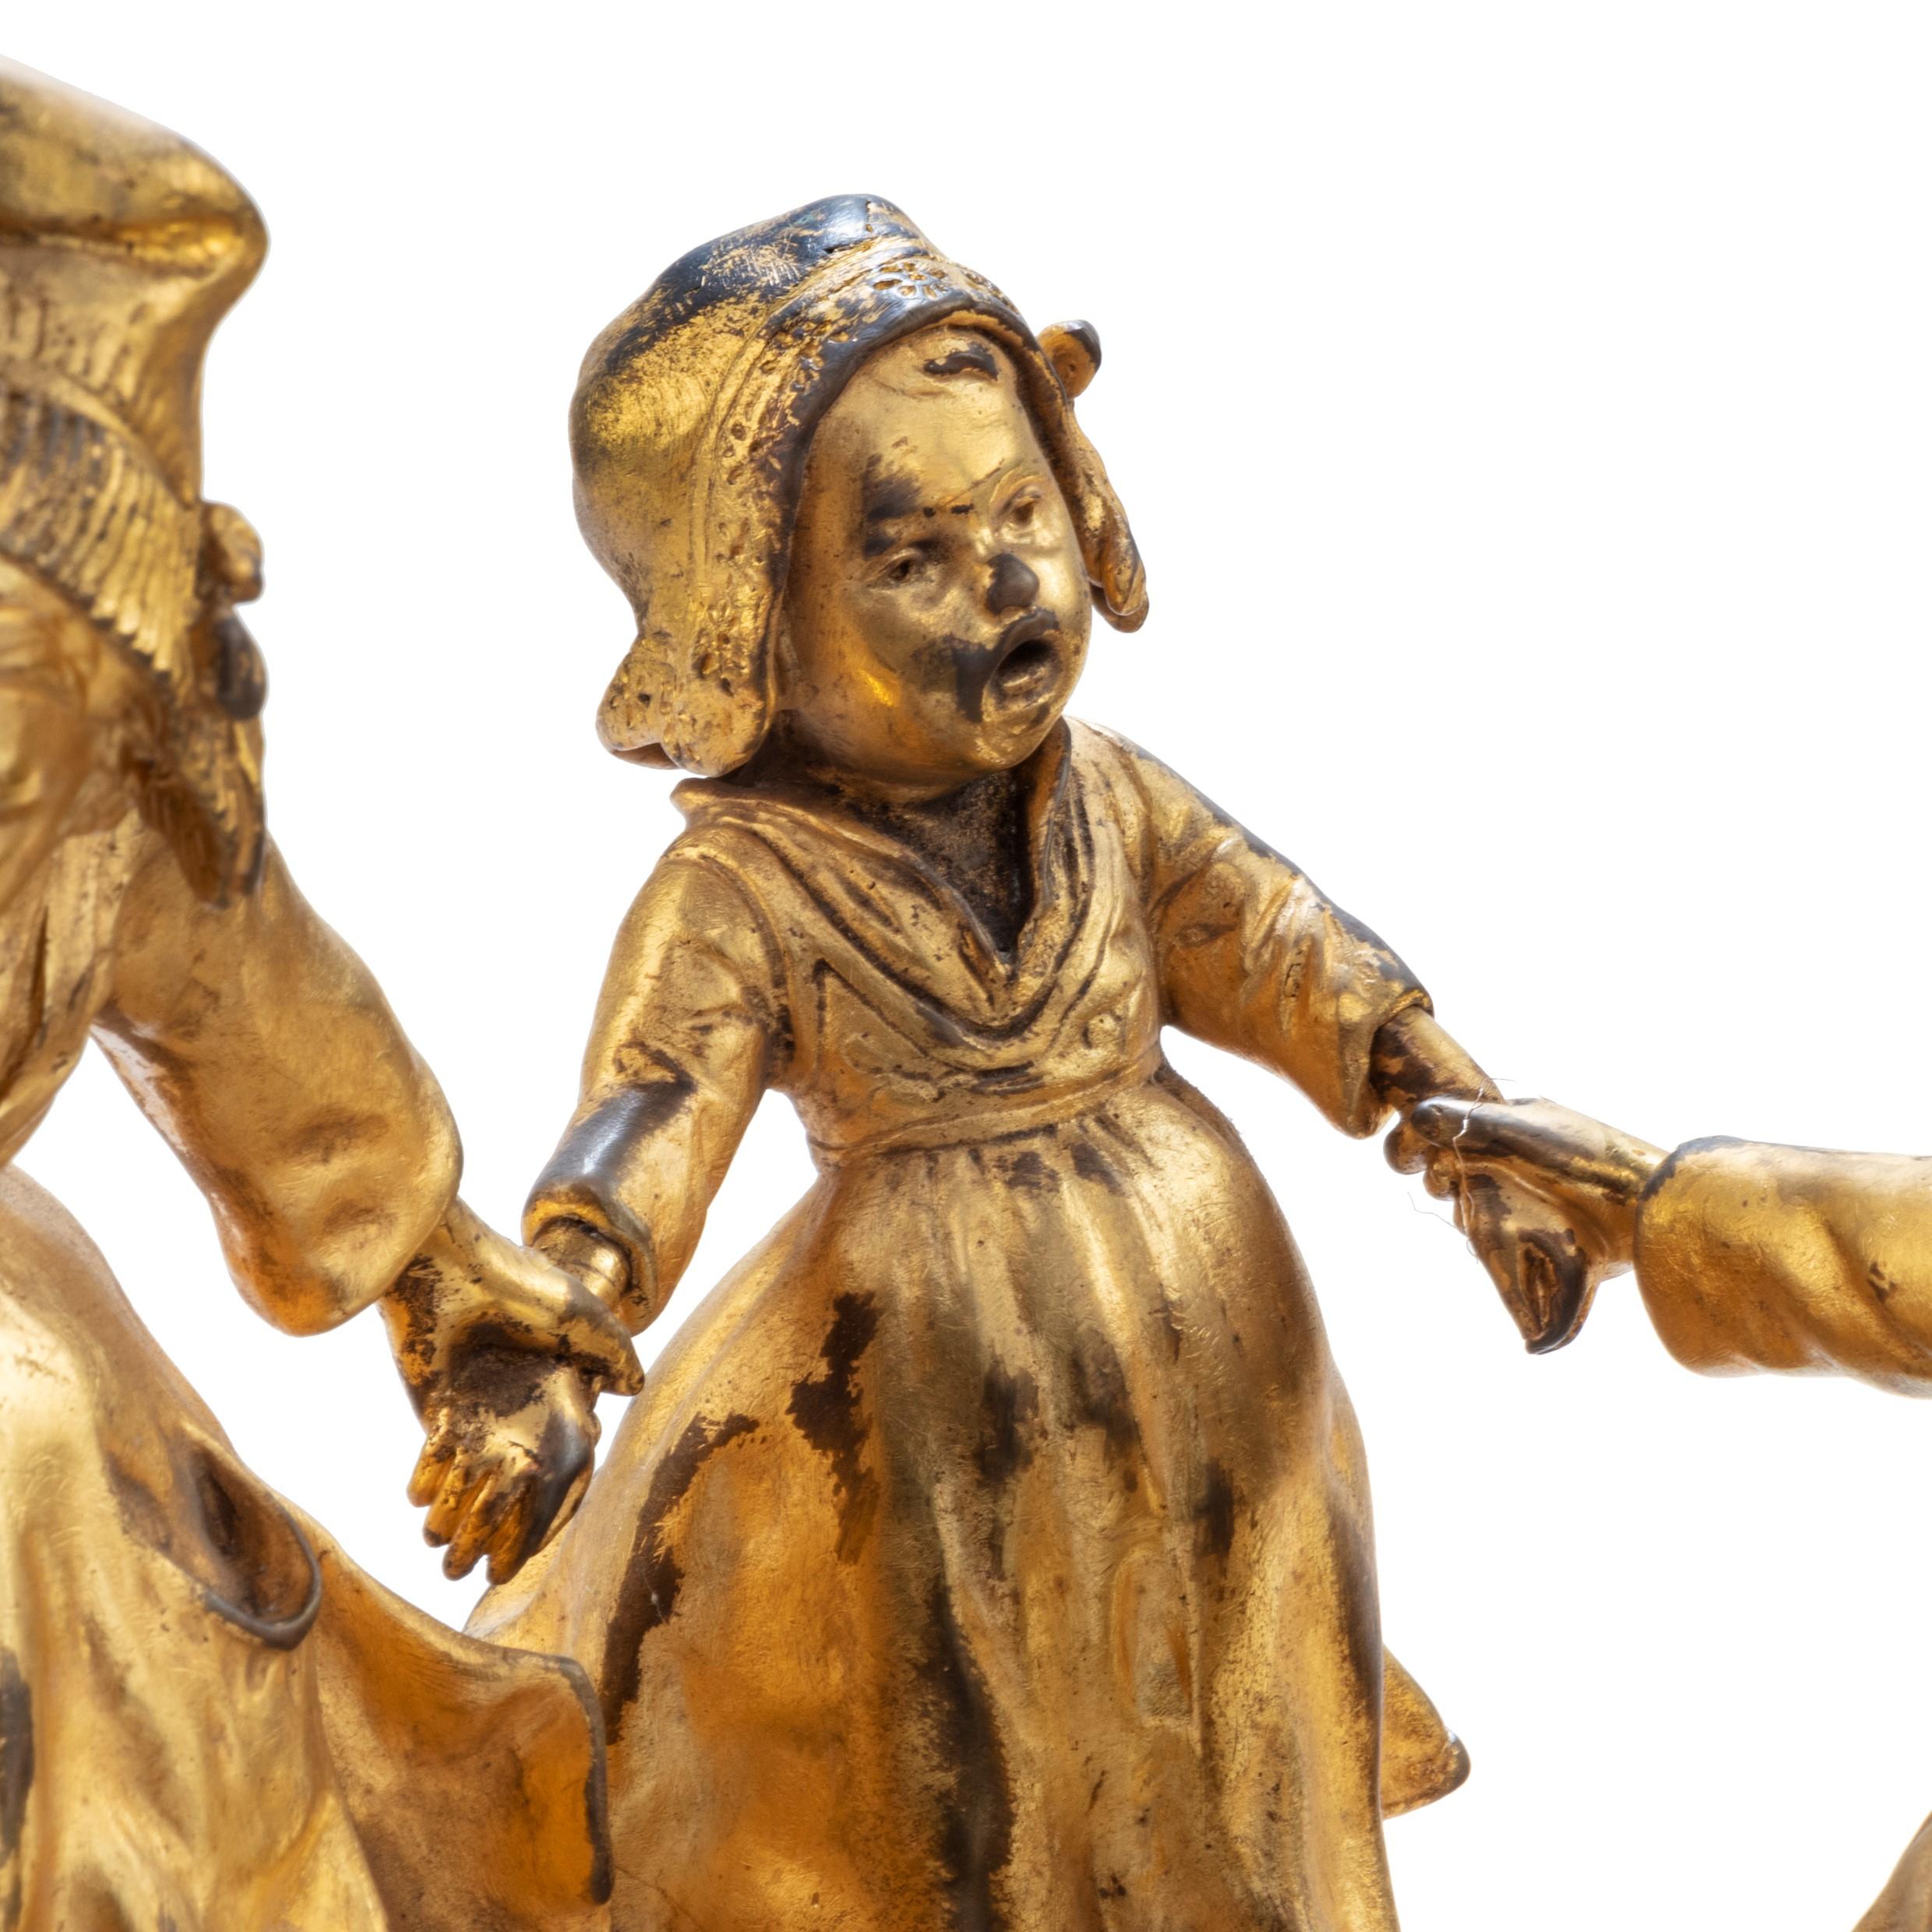 A charming gilt bronze group of Dutch children by D’Aste, showing five children in Dutch dress sliding on snow in their clogs, signed by J.D’ASTE.

Signed/Inscribed: signed by J.D’ASTE.

Guiseppe D’Aste was born in Naples but spent much of his